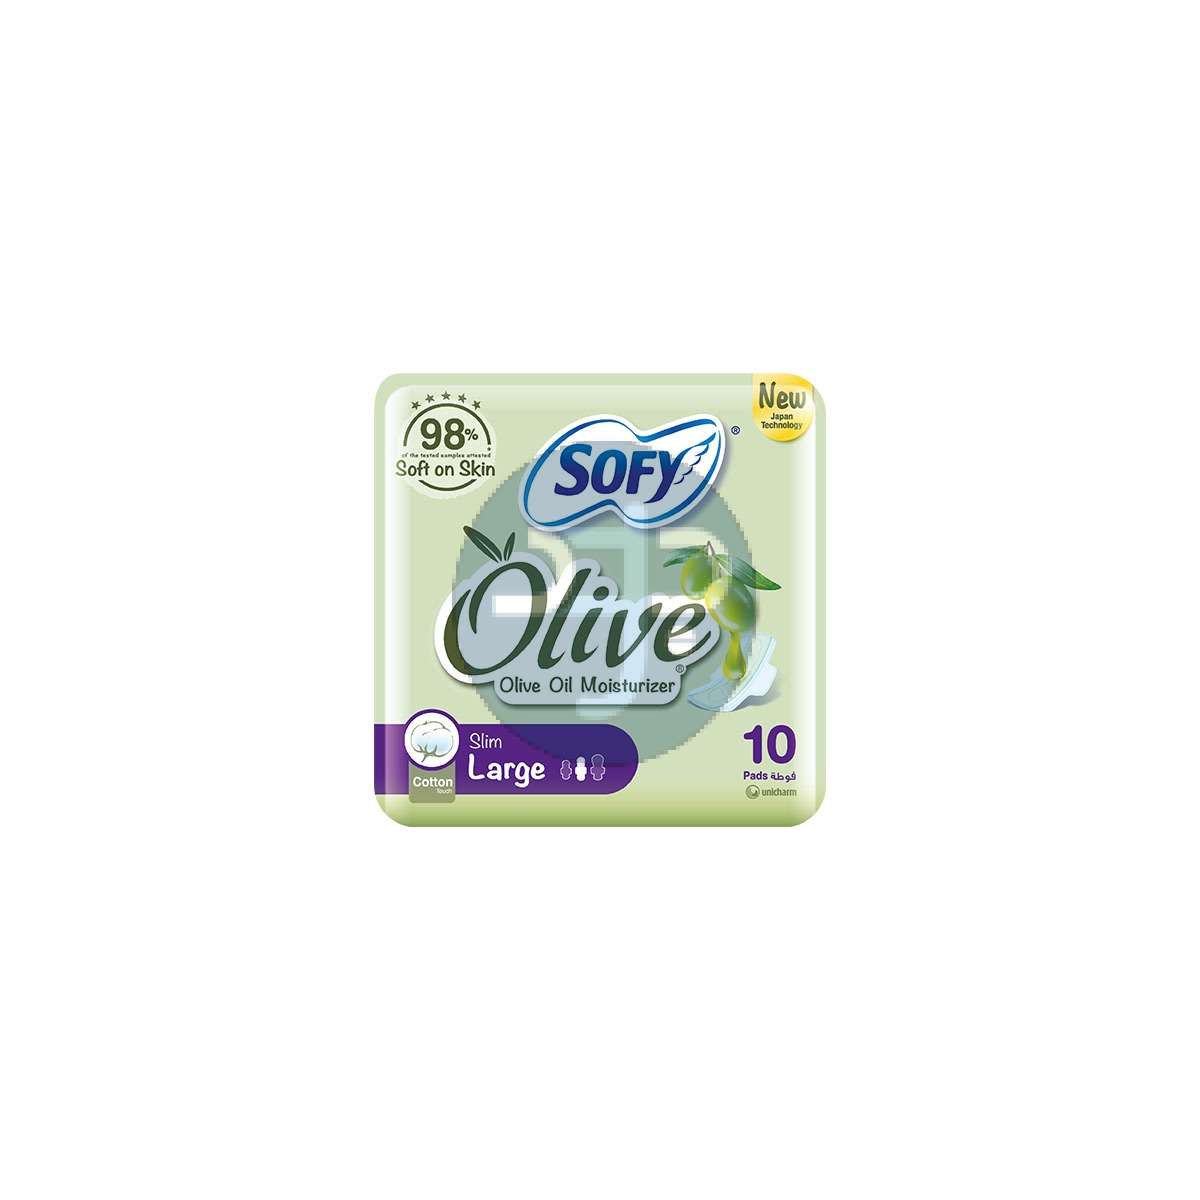 Product-SOFY Olive Sanitary Pads With Wings, Slim, Large 29 cm, Pack of 10 Pads